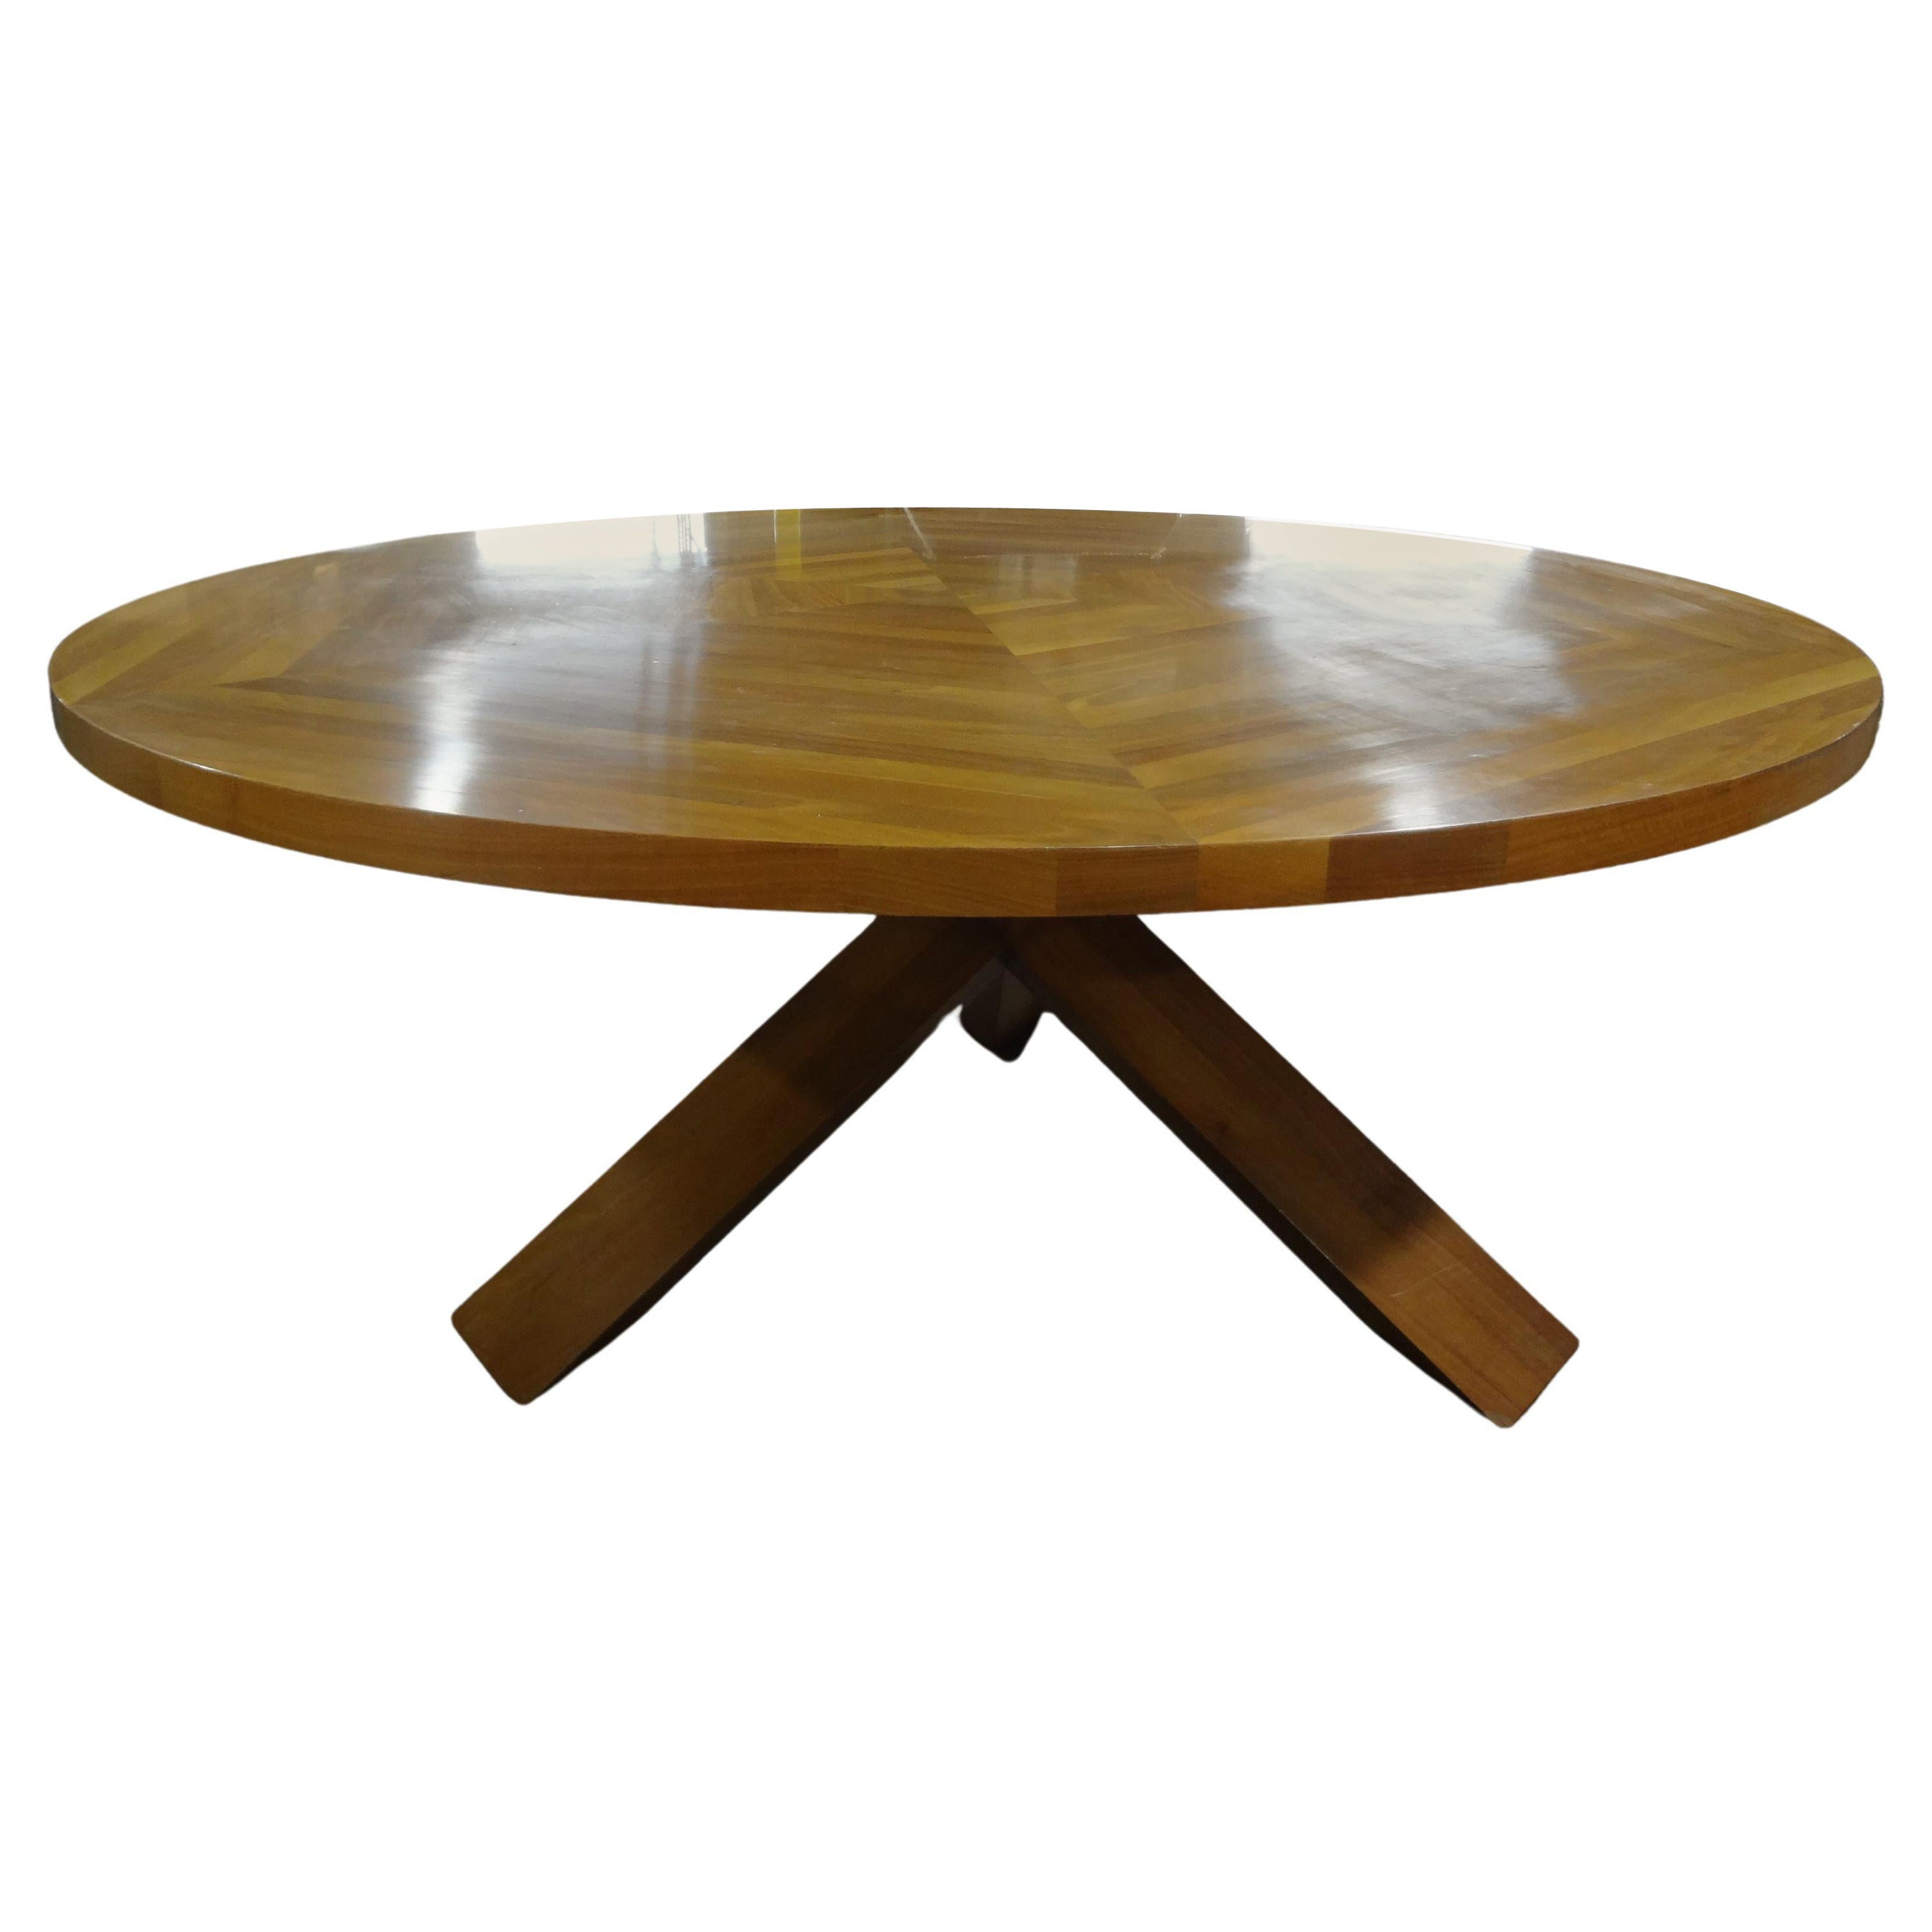 Italian Modern Tripod Center Table Or Dining Table By Cassina For Sale